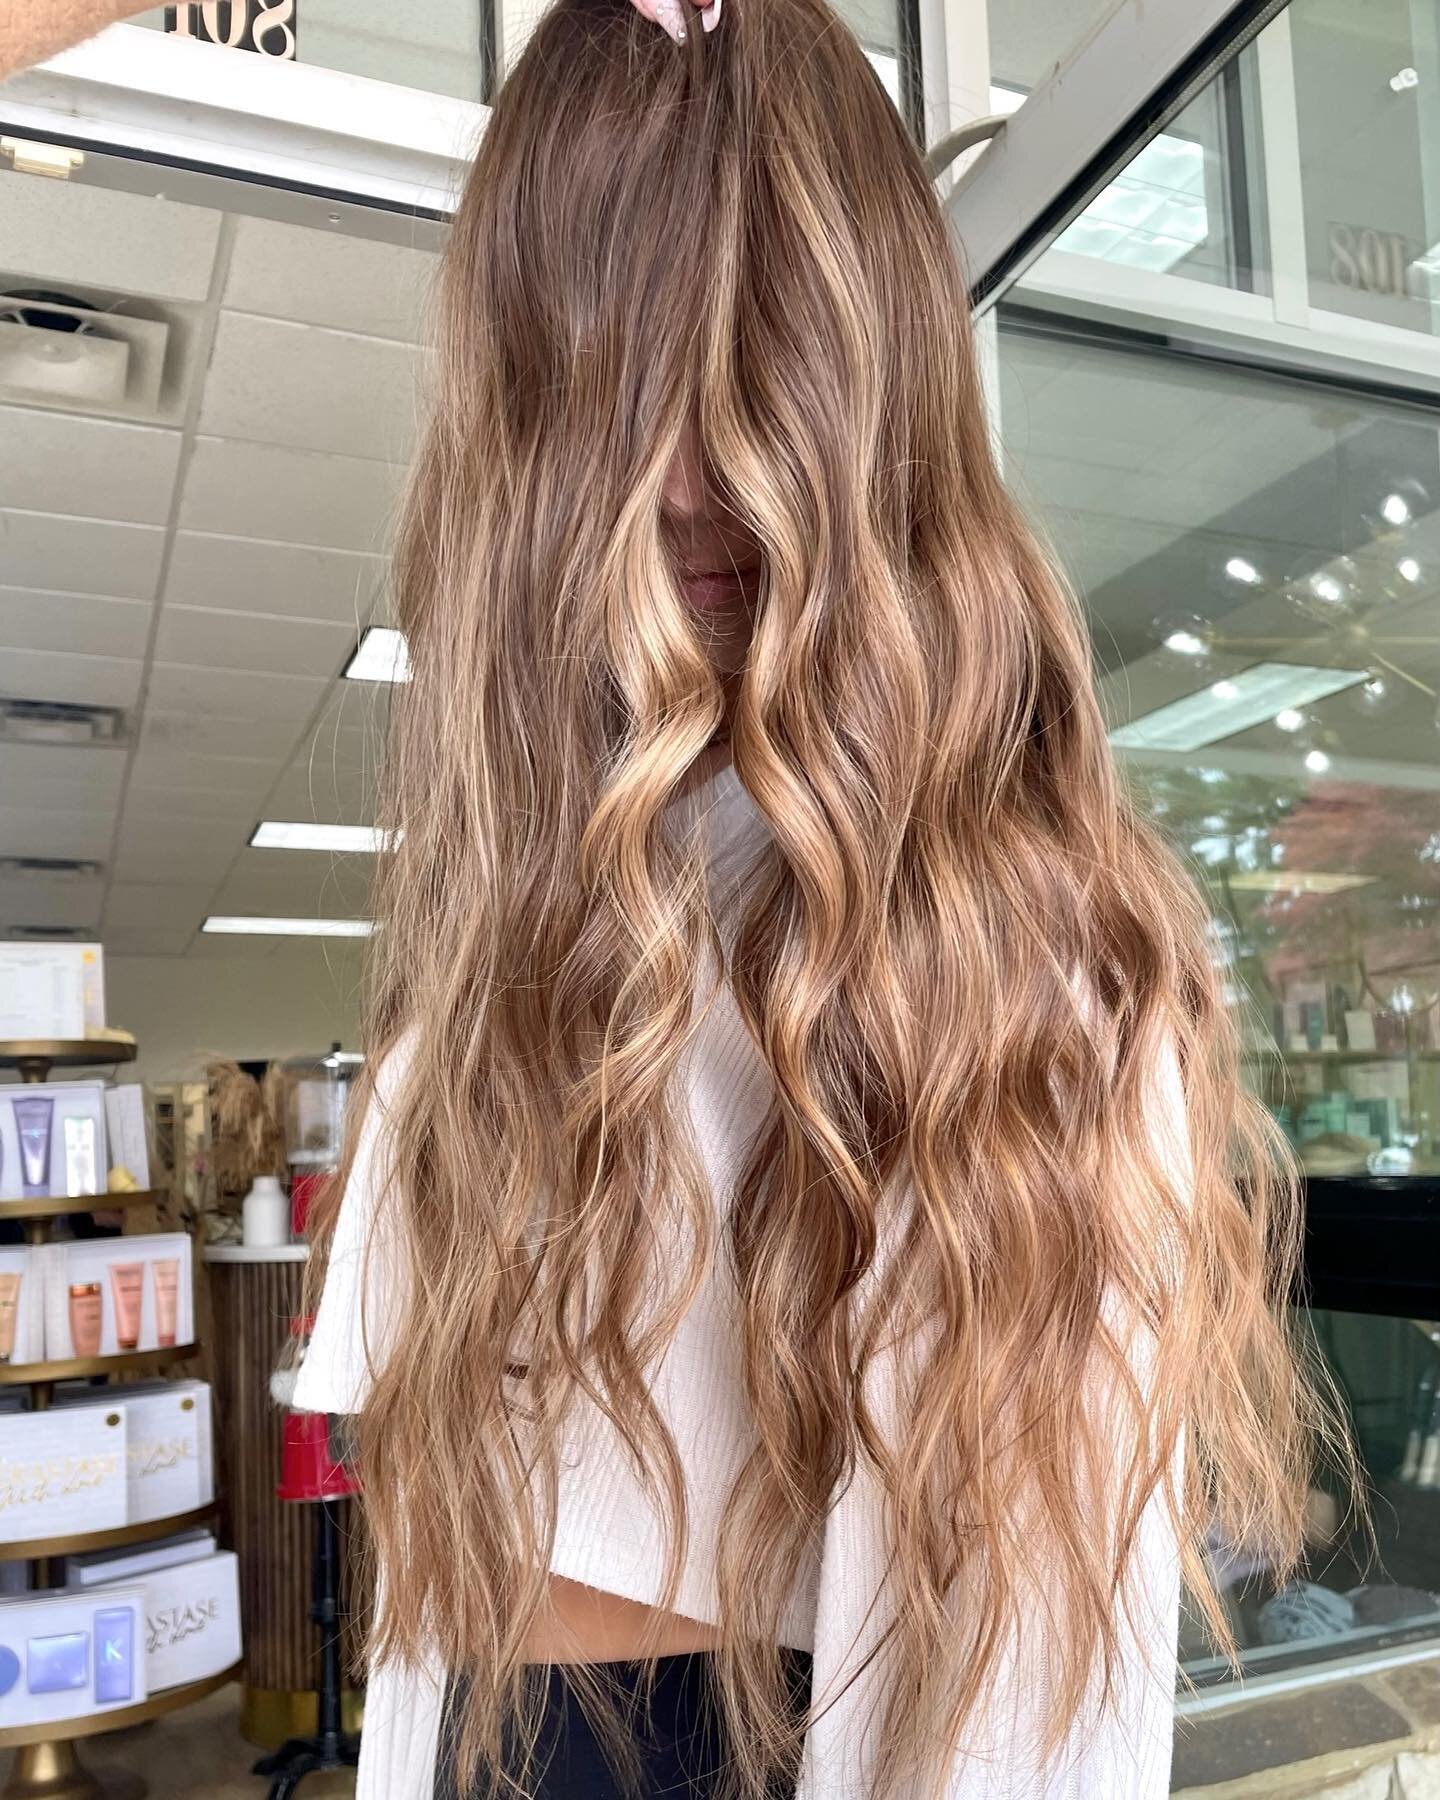 This gorgeous color is perfect for someone who prefers low maintenance and beautiful a grow out process😍

Book with us in time to refresh that hair for the holidays! 

Hair by: @ashley.doeshair_ 

#acworthstylist  #hairstylist  #acworthsalon